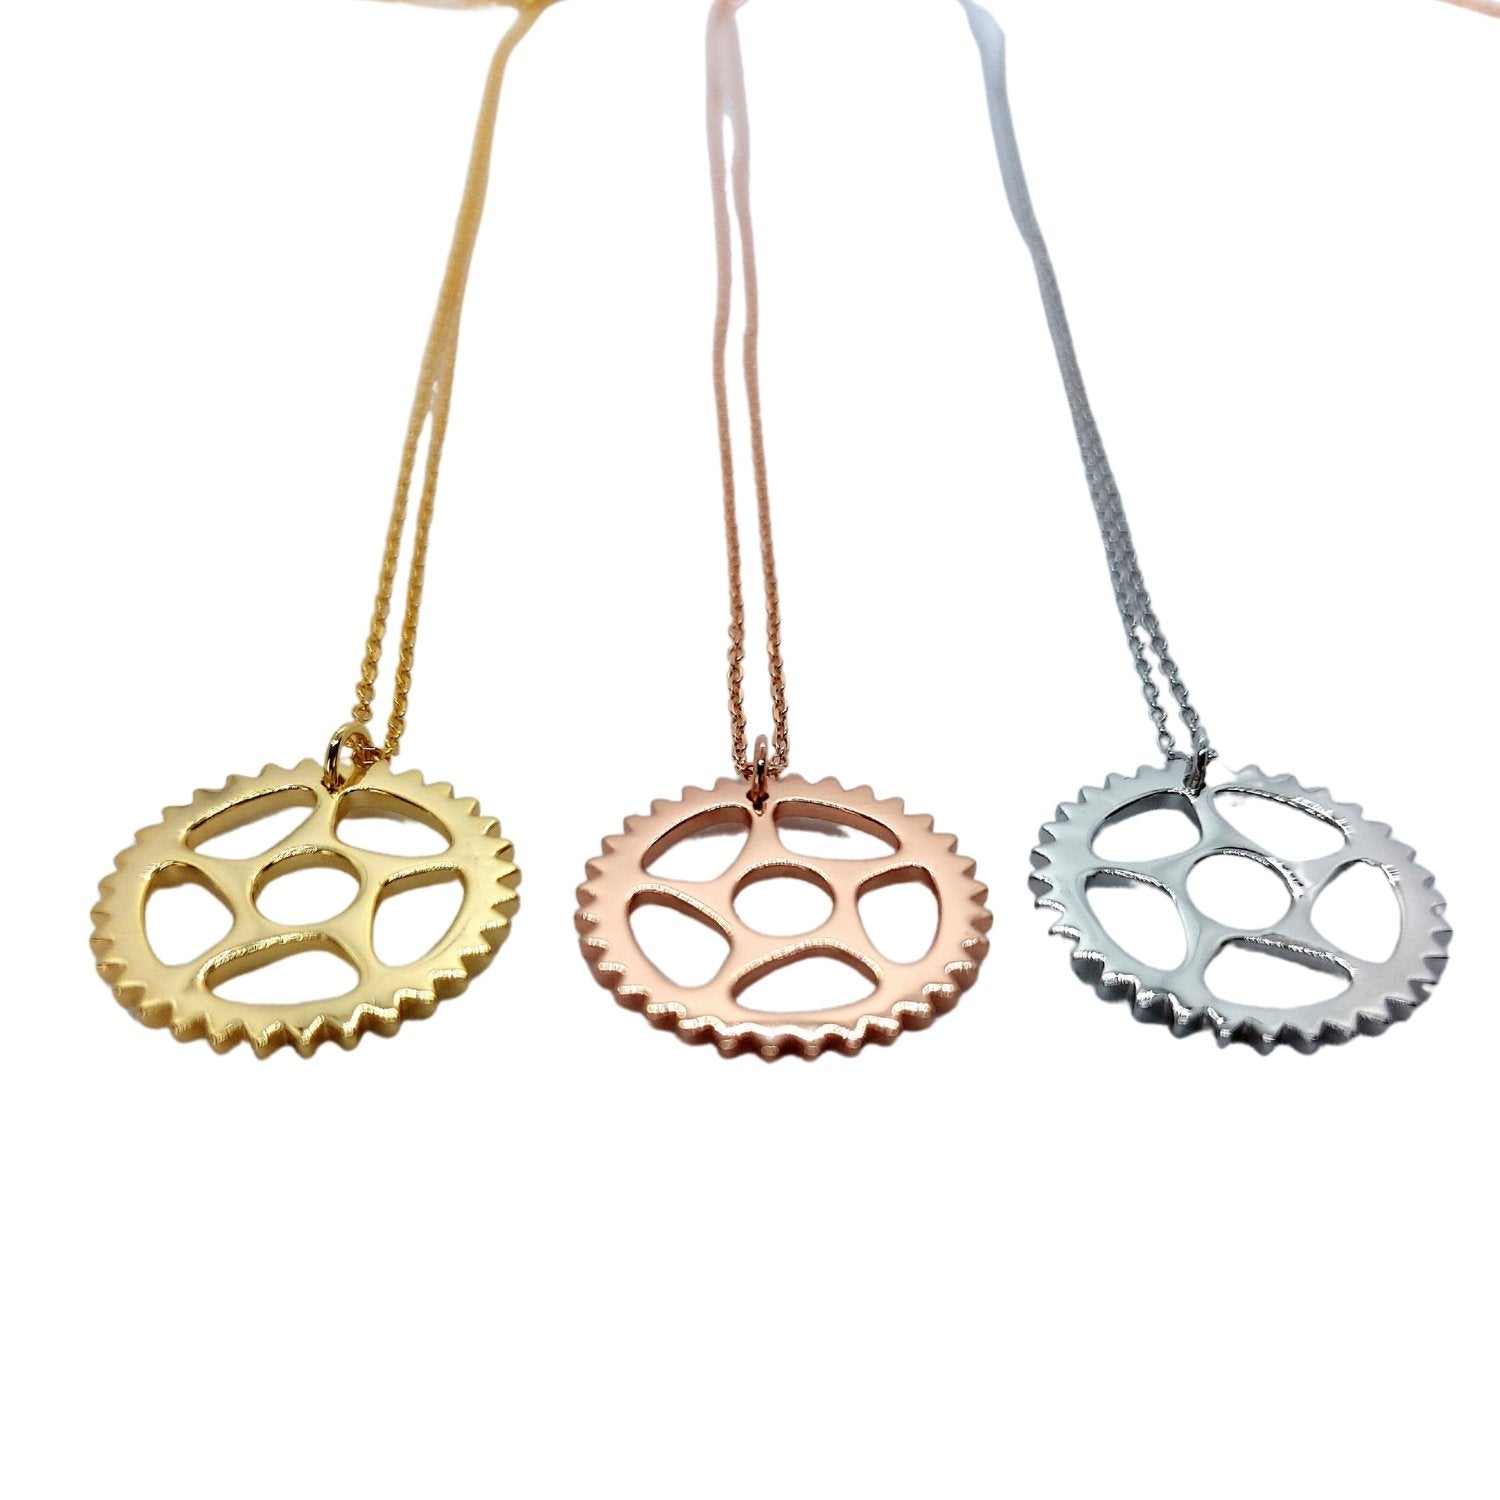 3 bike chain ring, cog or sprocket pendant necklace in gold, rose gold, and silver on a white background